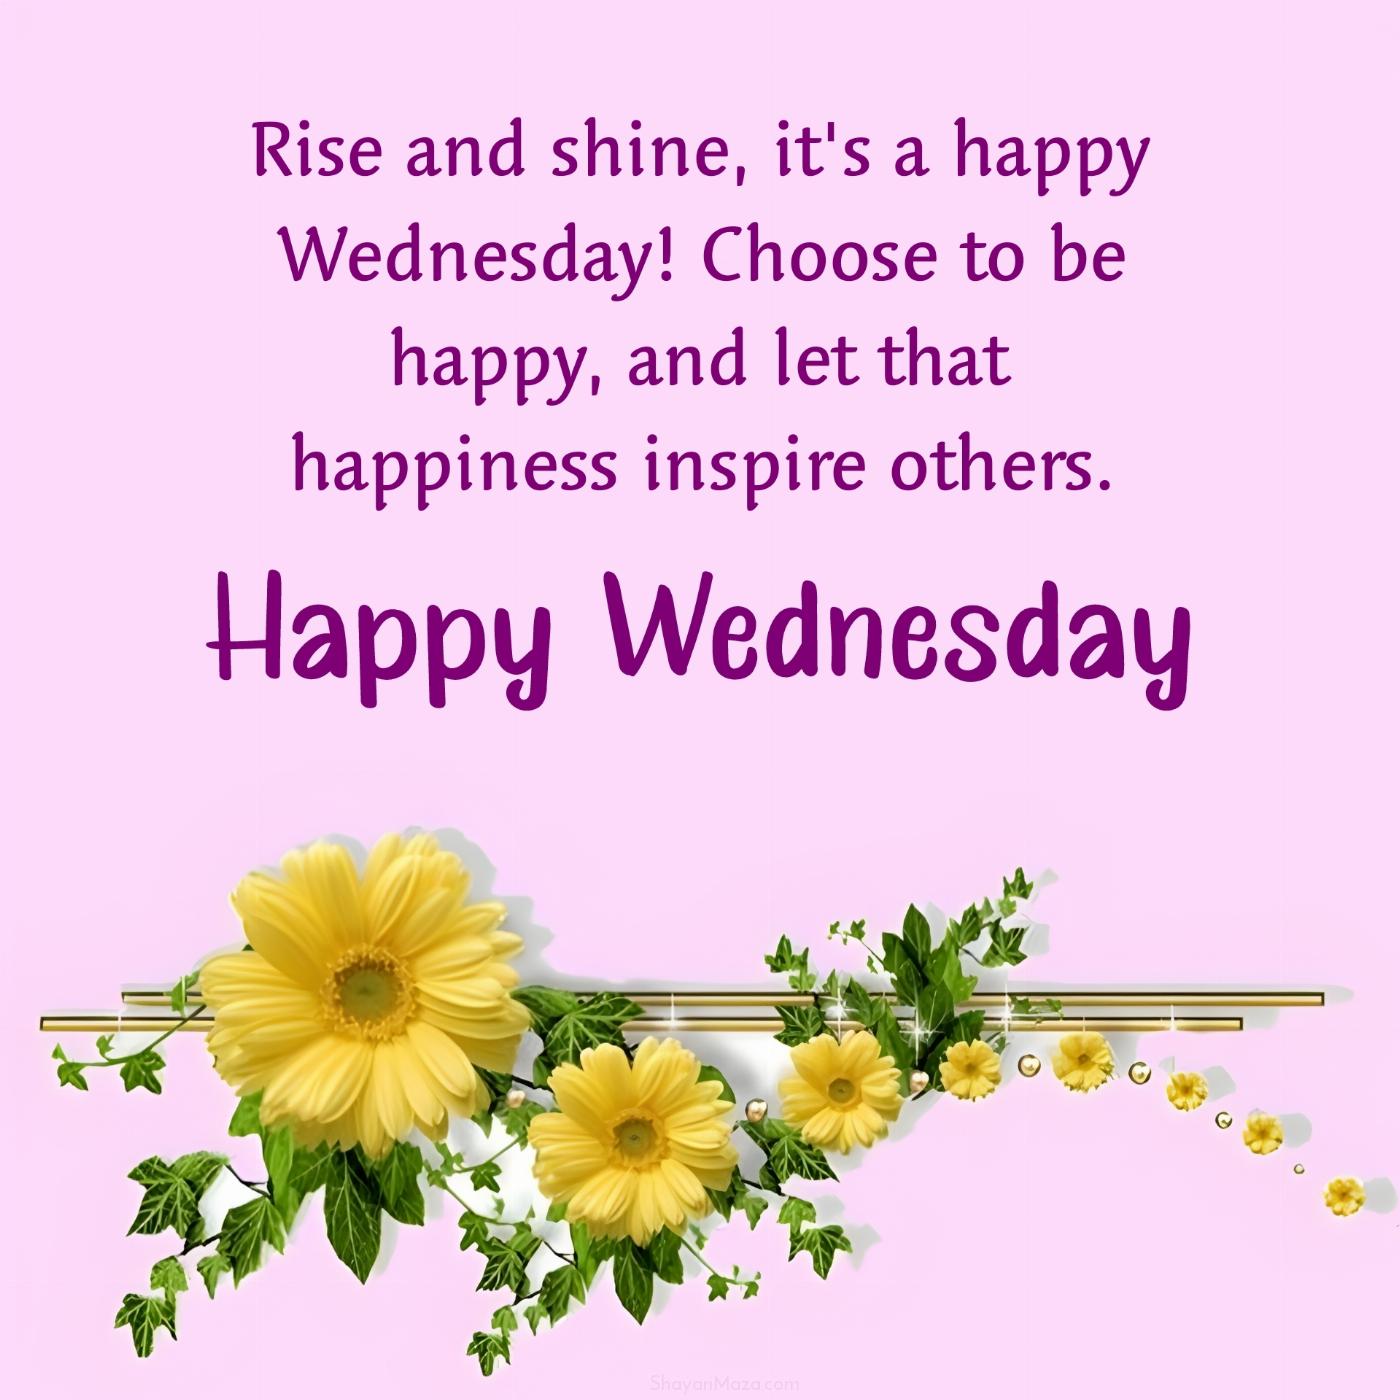 Rise and shine it's a happy Wednesday! Choose to be happy